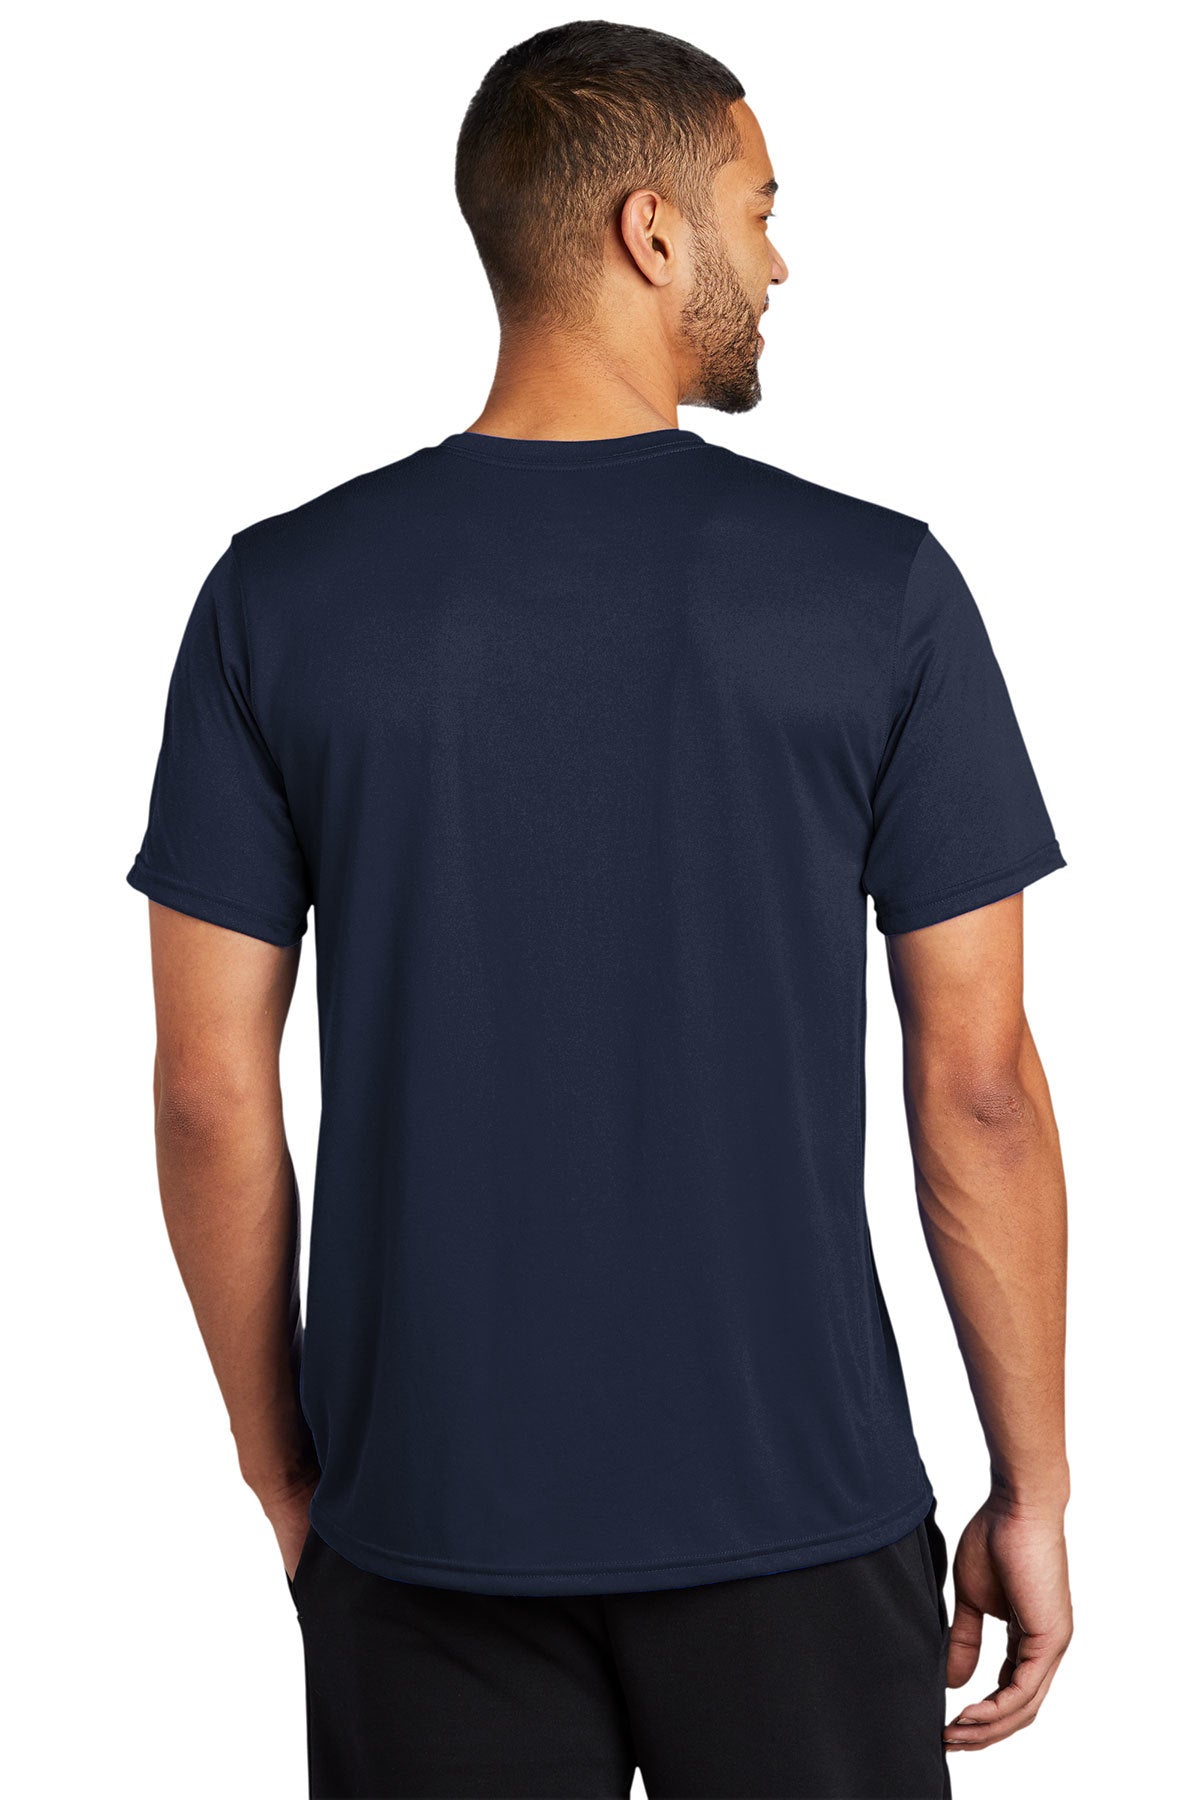 Nike Legend Customized T-Shirts, College Navy